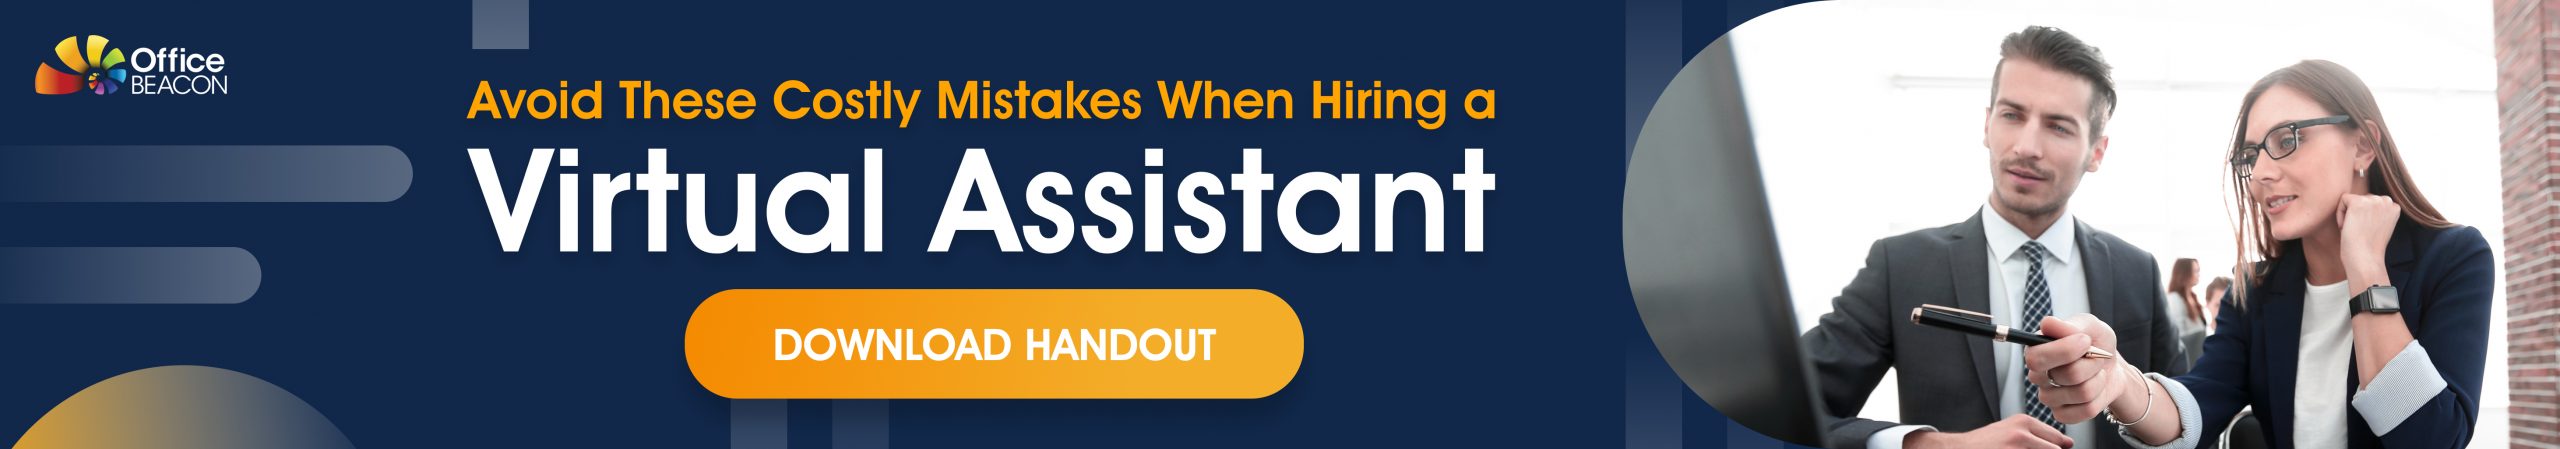 CTA to download handout on mistakes to avoid when hiring a virtual assistant